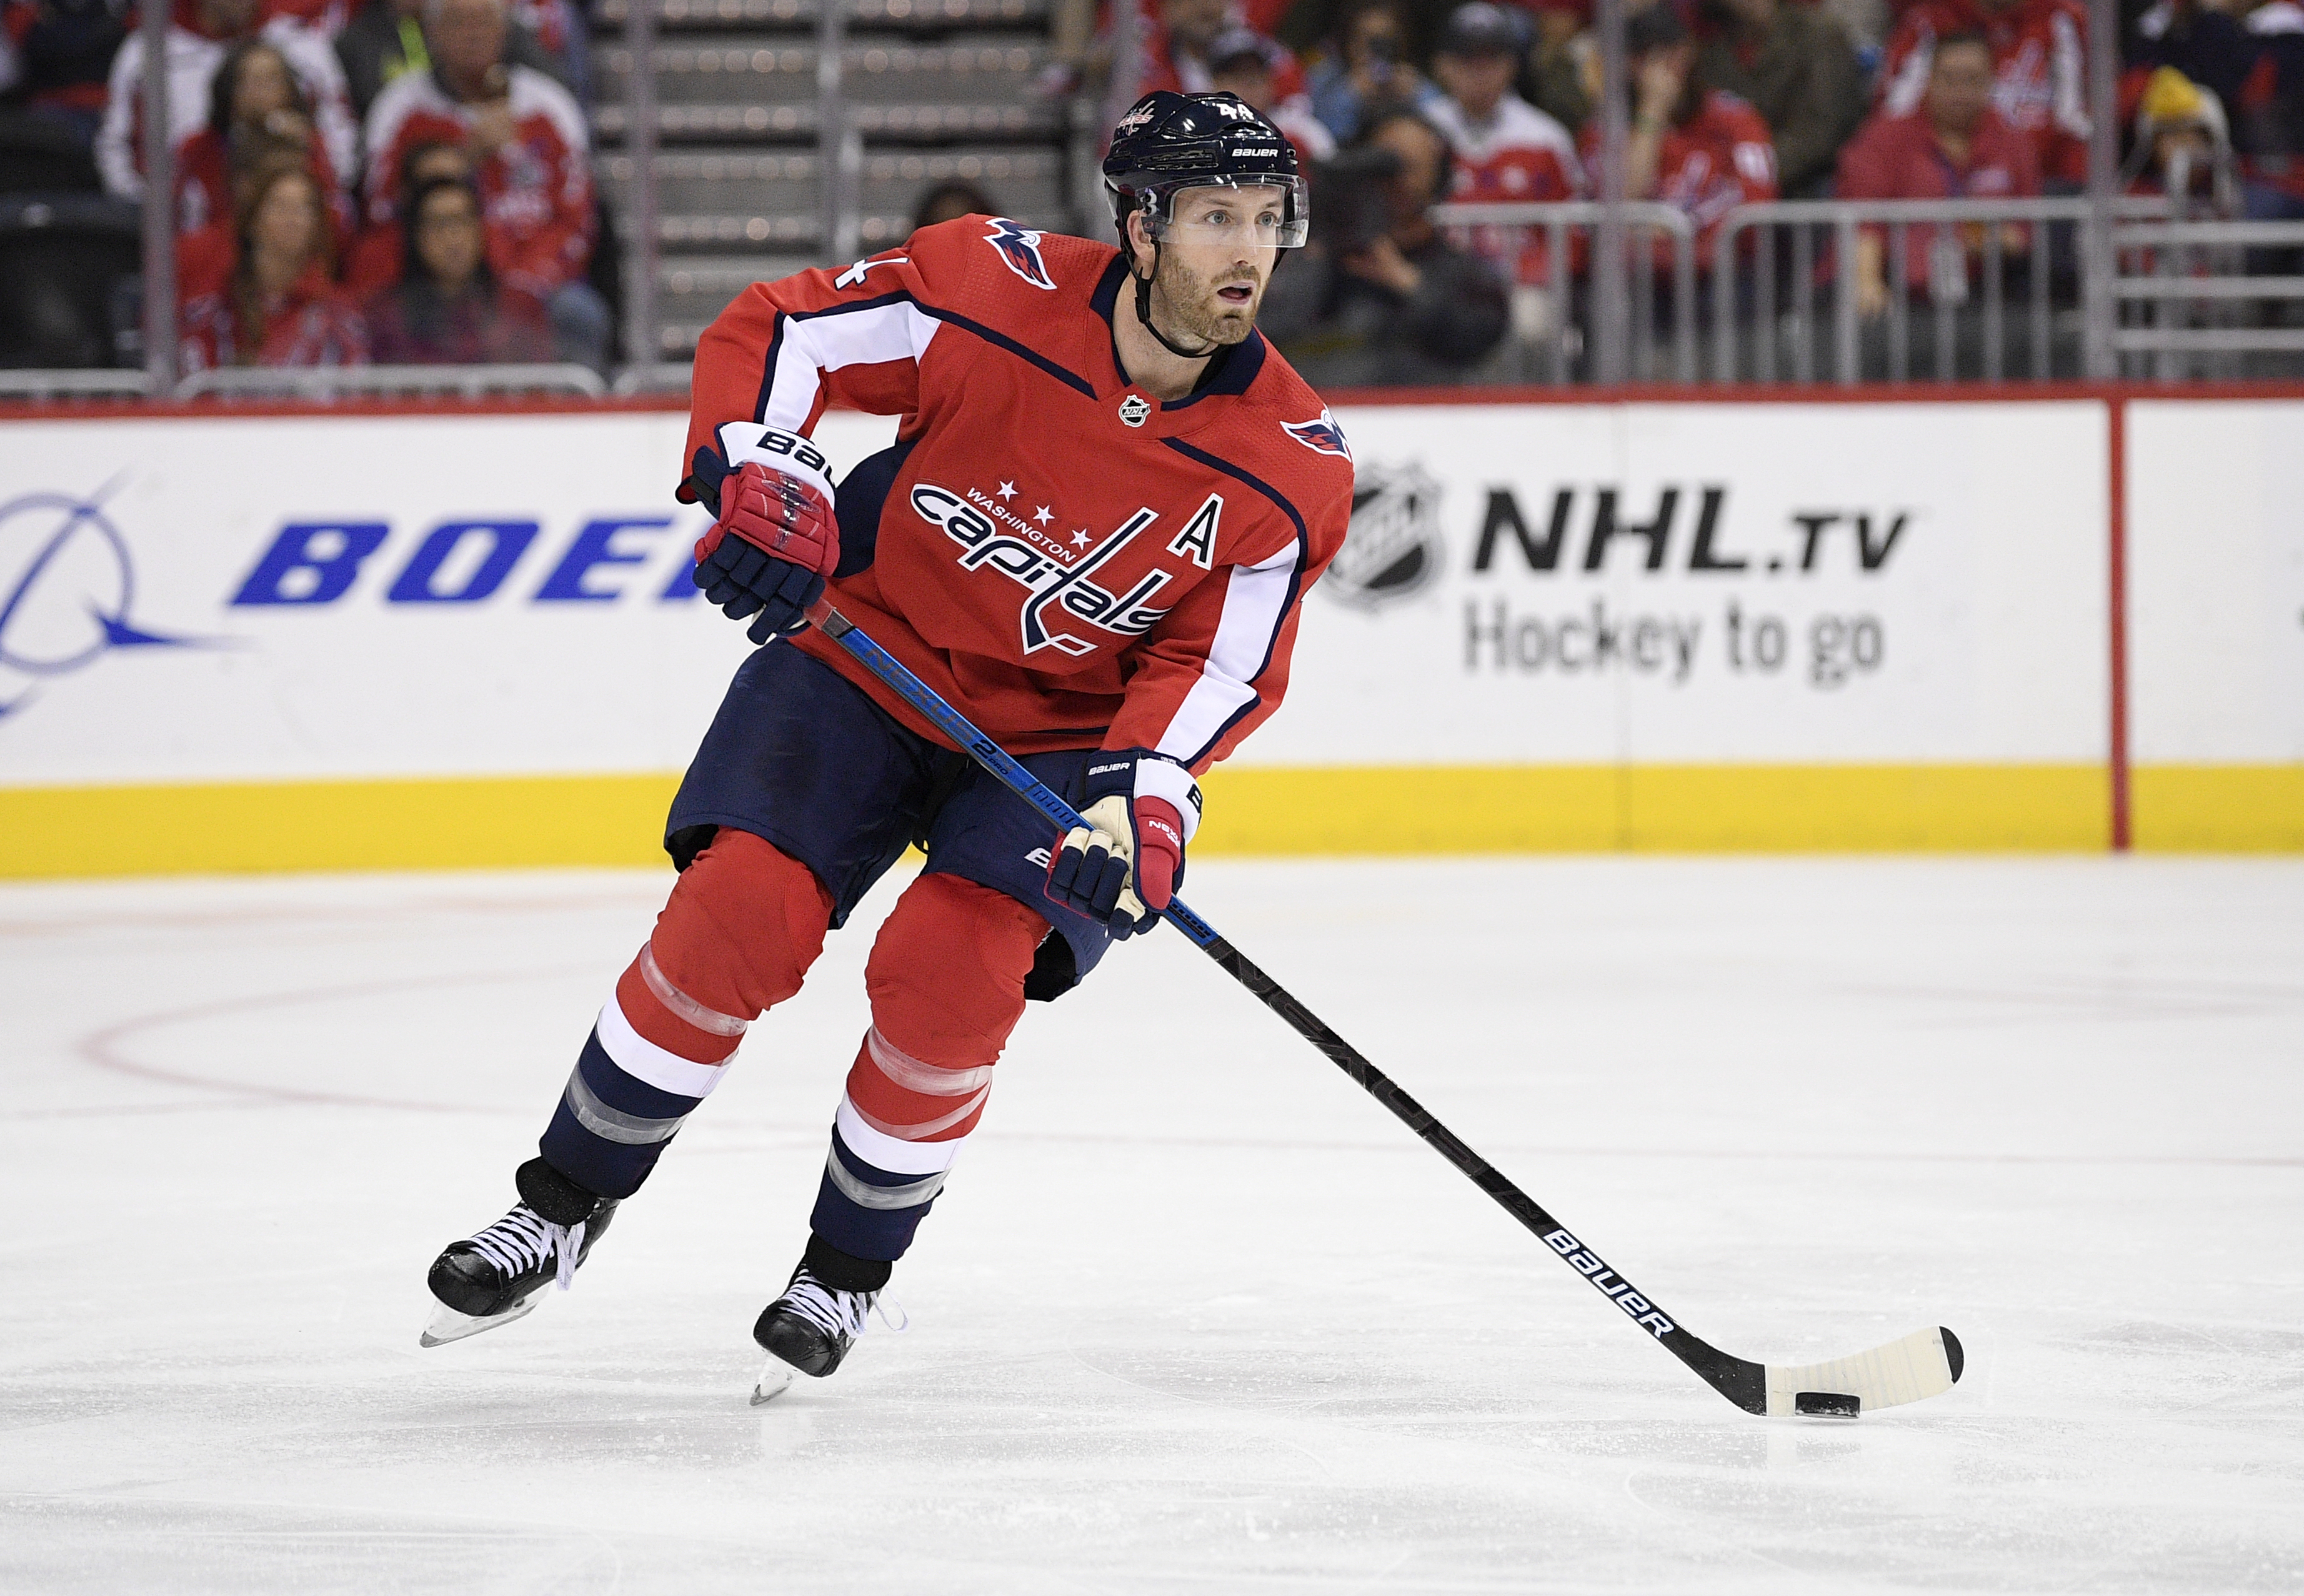 Capitals' Orpik out 4-6 weeks after knee surgery